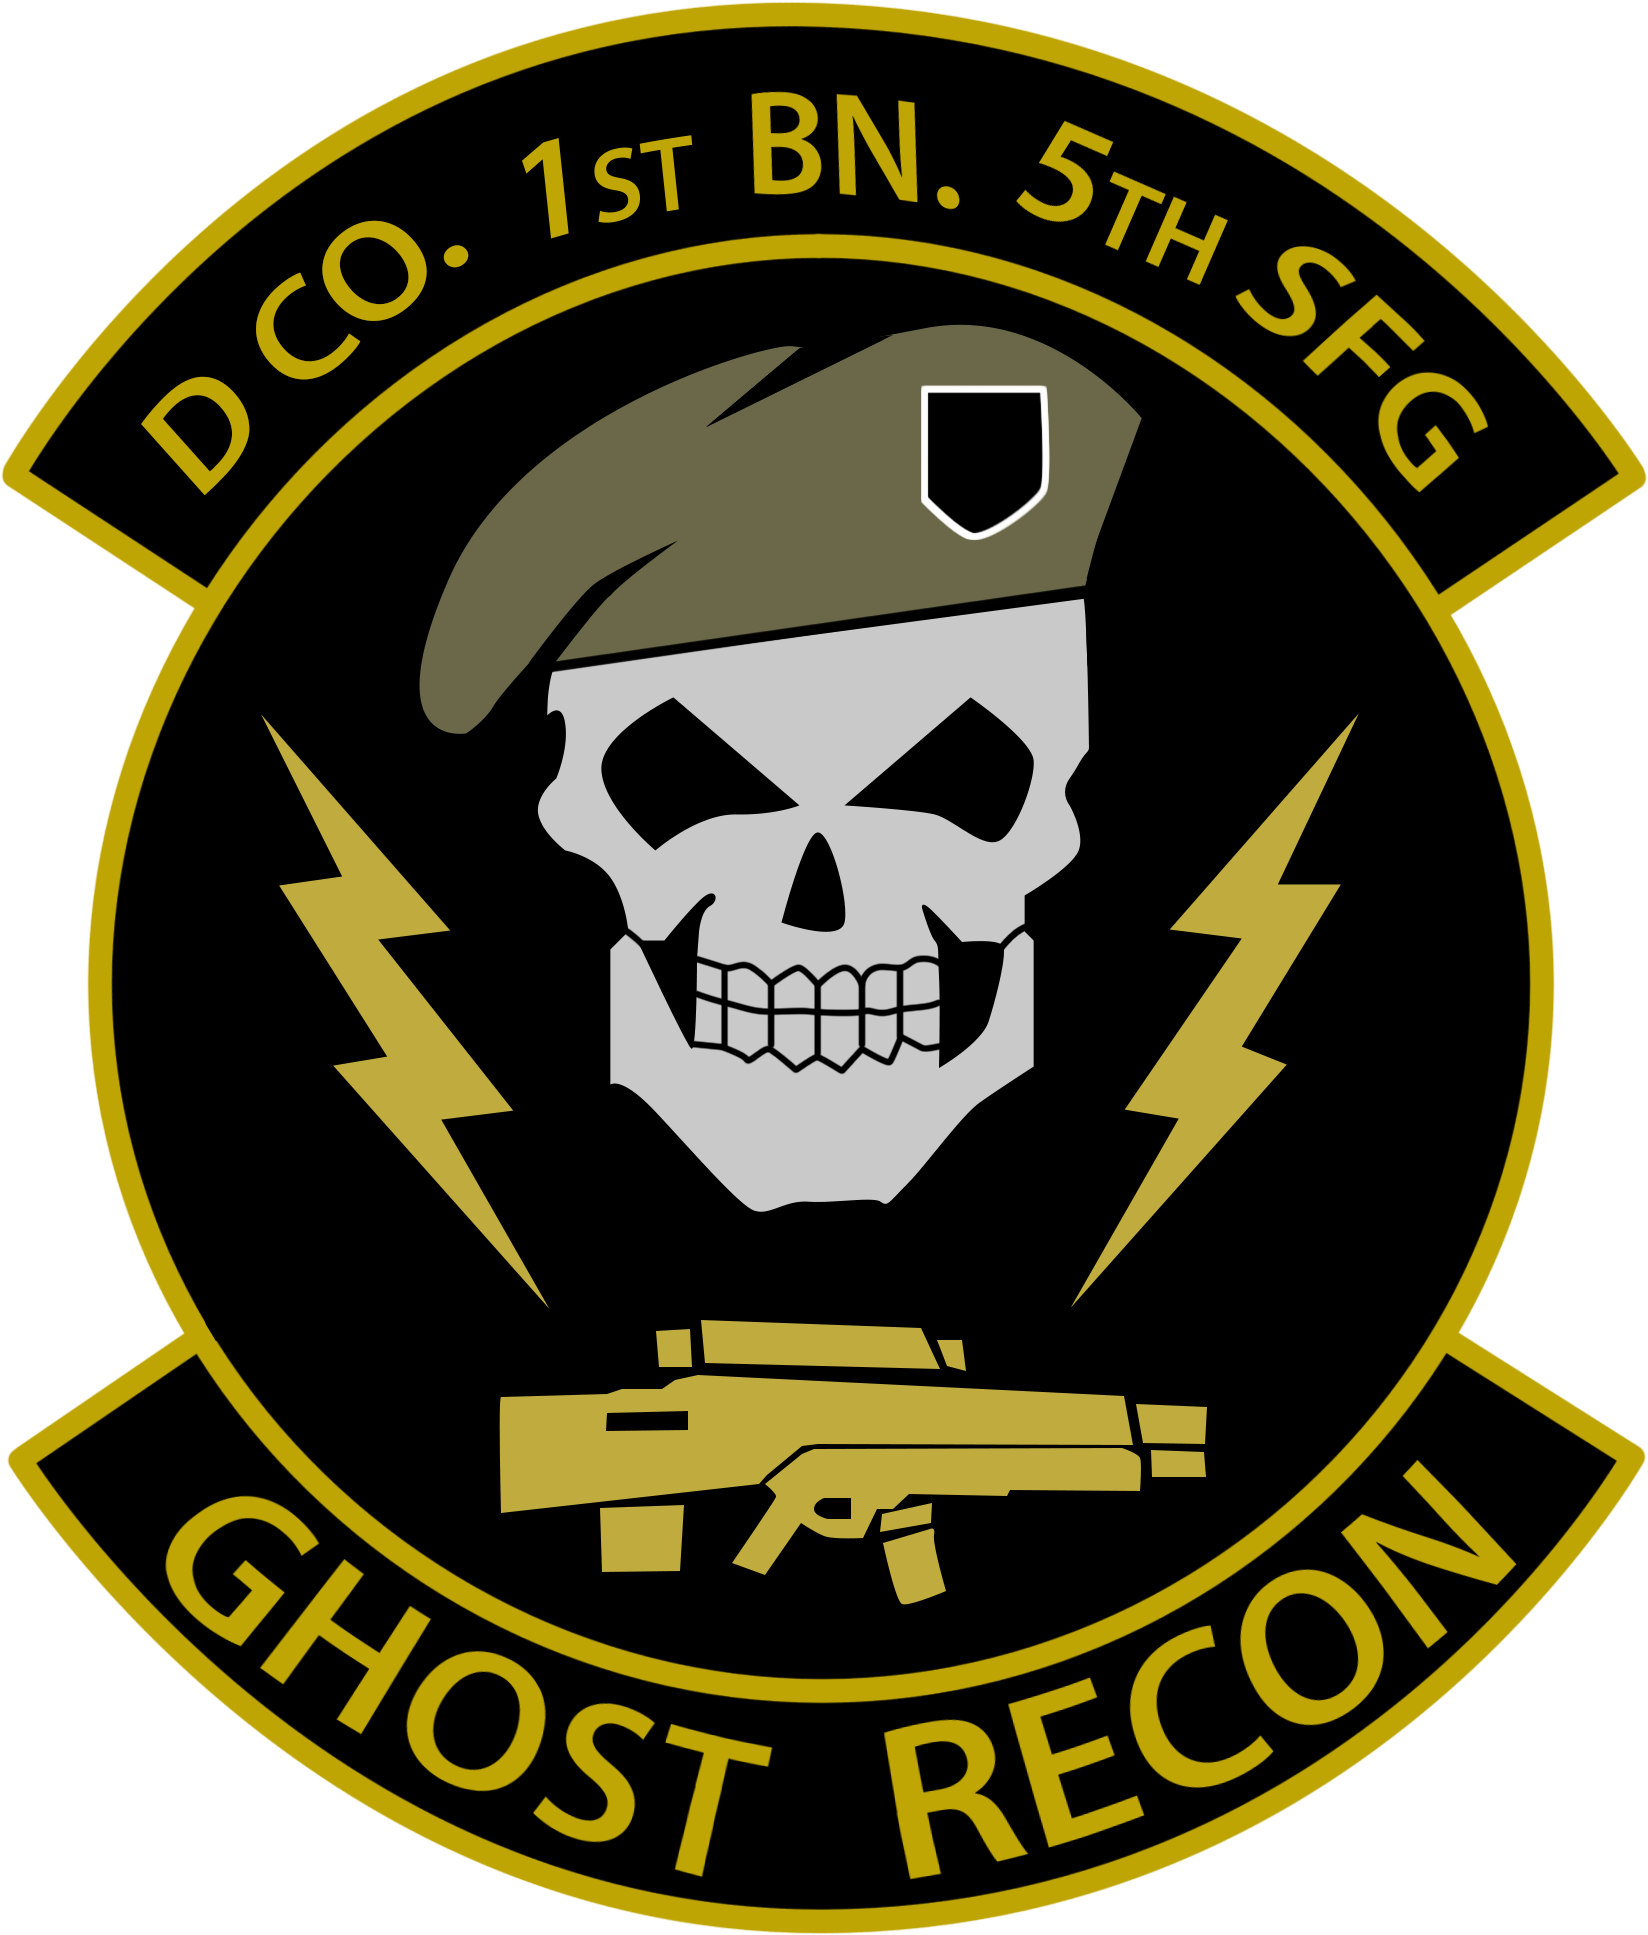 Ghostrecon Logo - Special Forces Insignia (2000x2000)